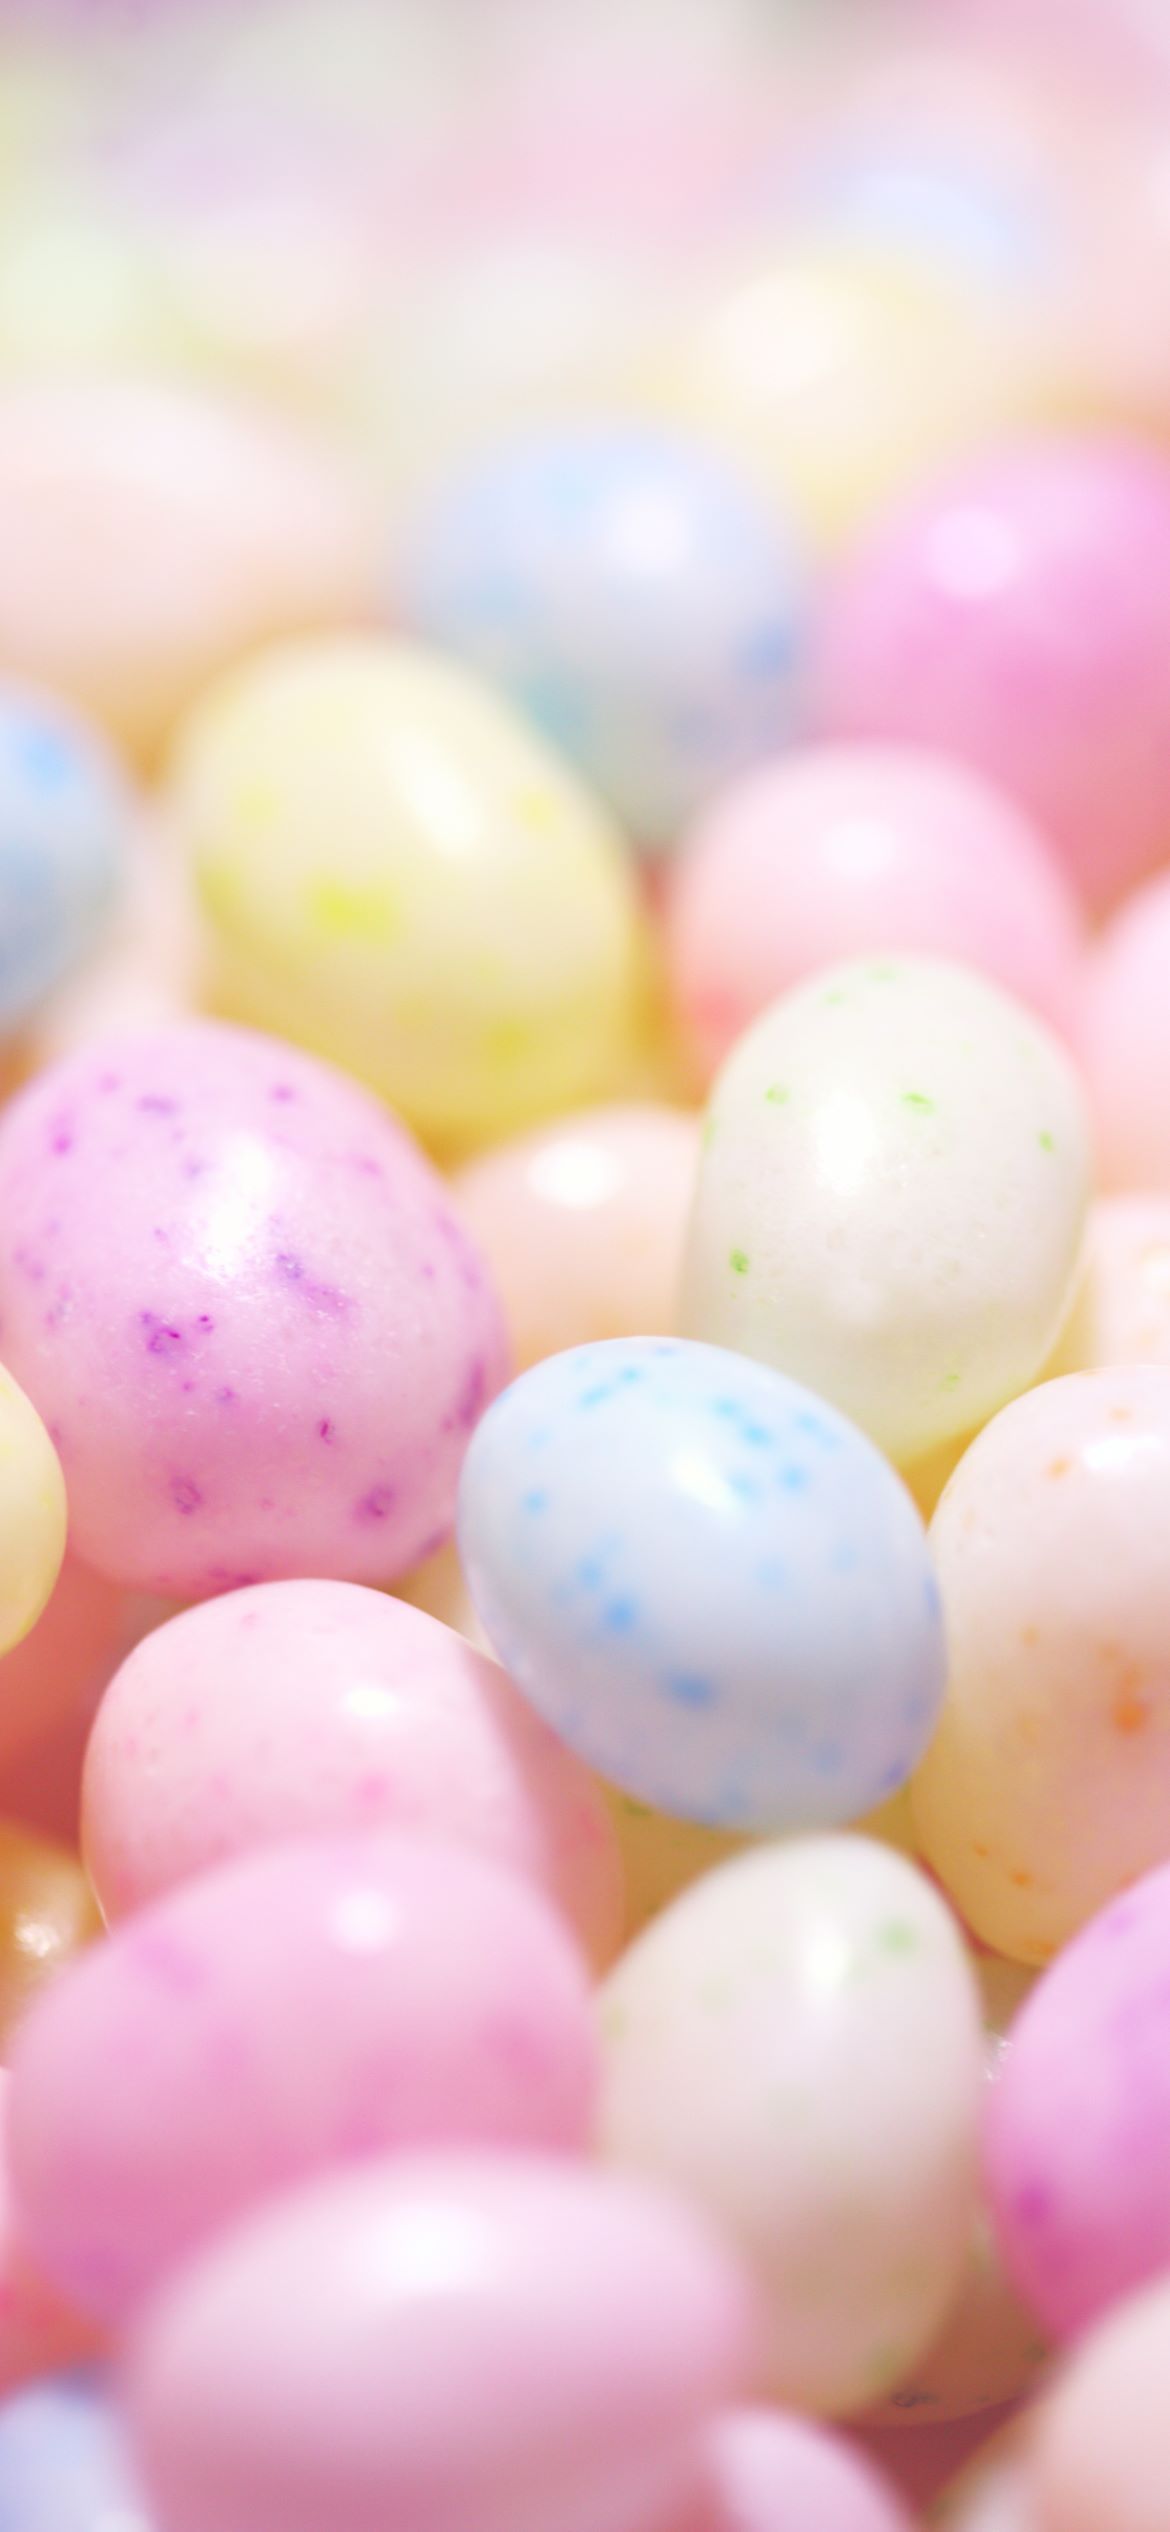 A close up of jelly beans in pastel colors. - Easter, egg